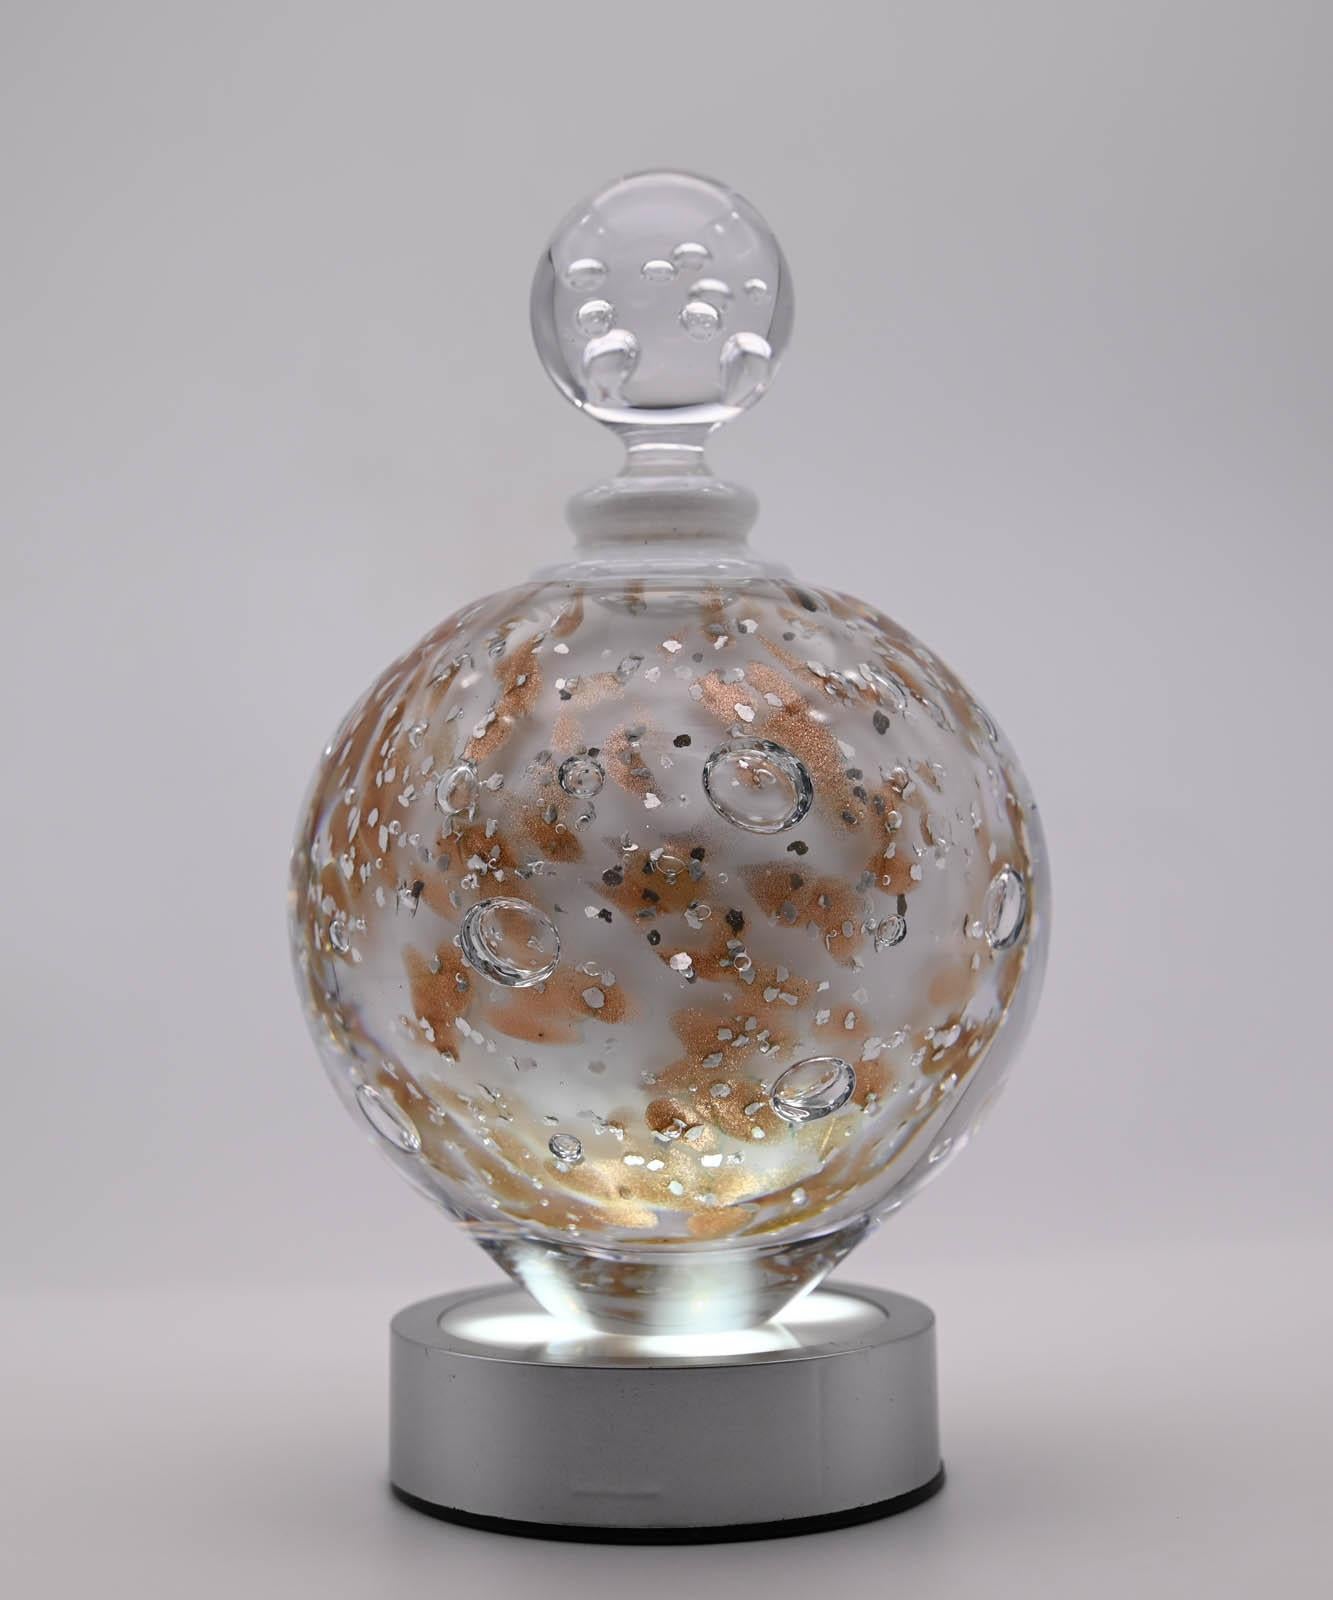 Jorge MATEUS
French master glassmaker

Flacon Perce Neige, 2021

Art Glassware - Unique piece
Size : 18 x 12 x 12 cm
Signed on the base.
In perfect condition.

Sold with invoice and certificate of authenticity.
Fast and careful shipping with